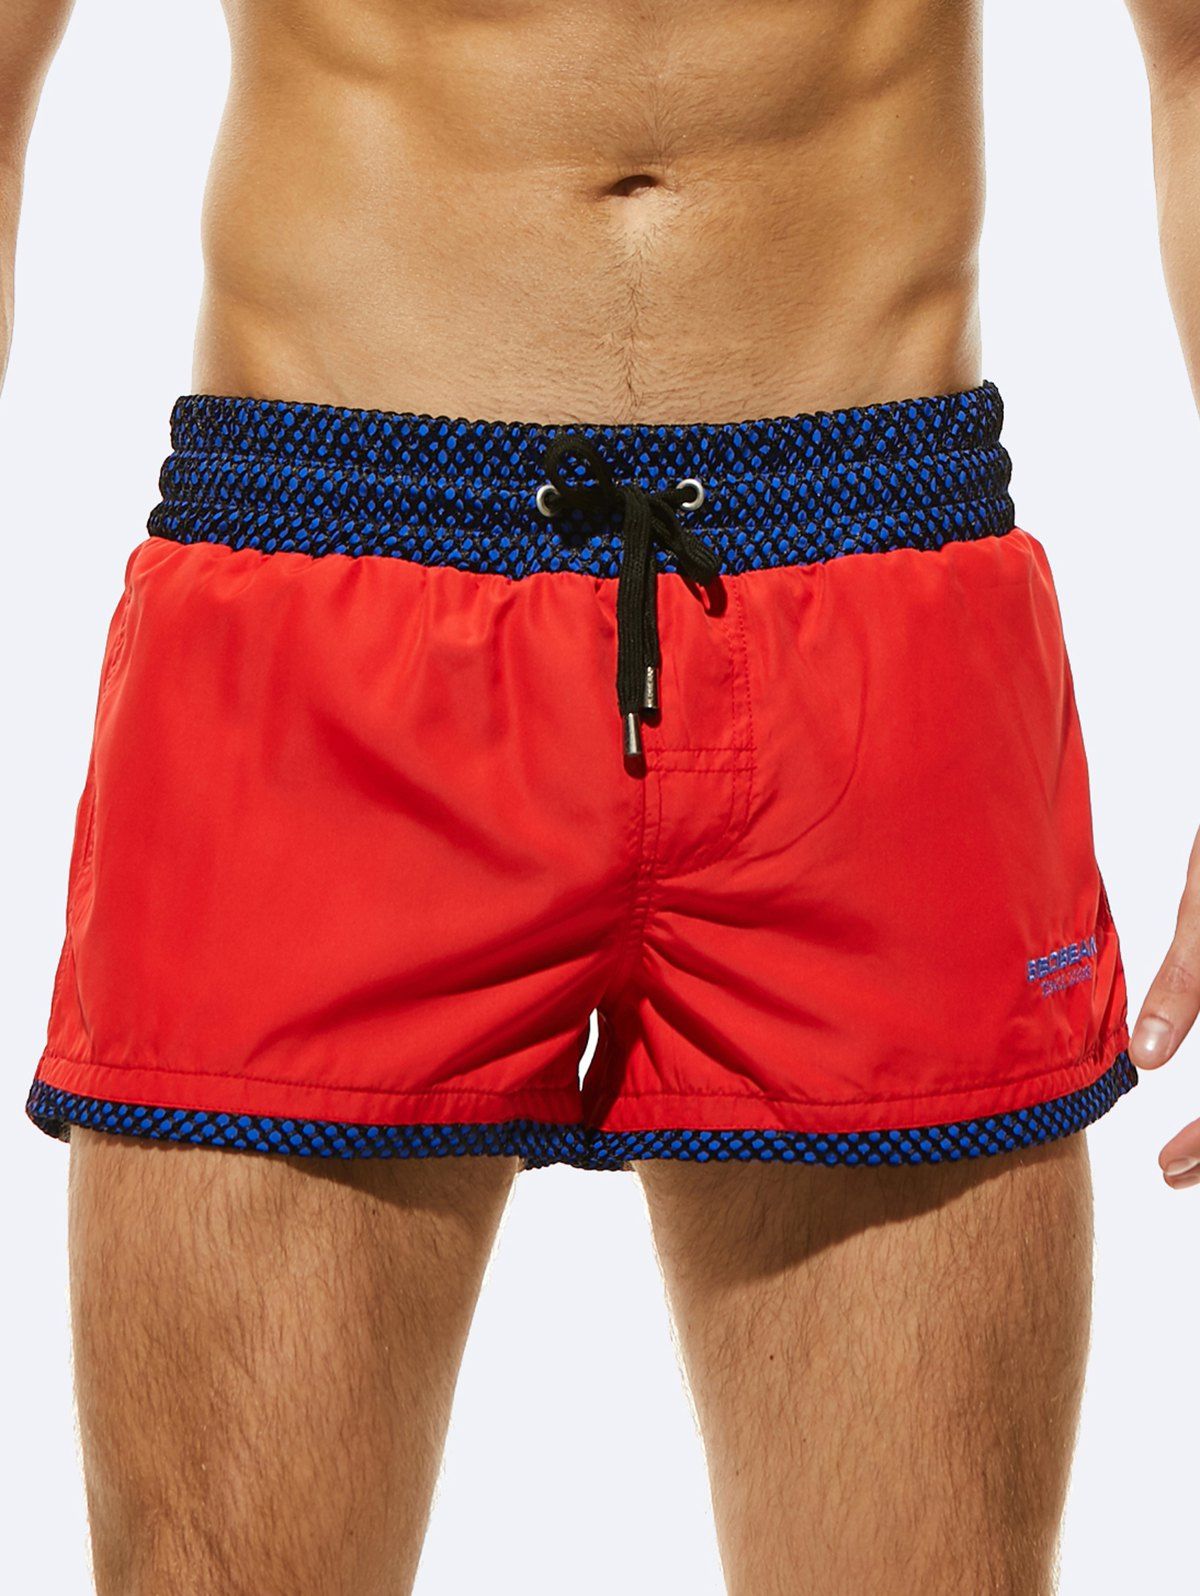 Casual Board Shorts Contrast Colorblock Lace Panel Drawstrings Pockets Summer Ringer Beach Shorts - RED L